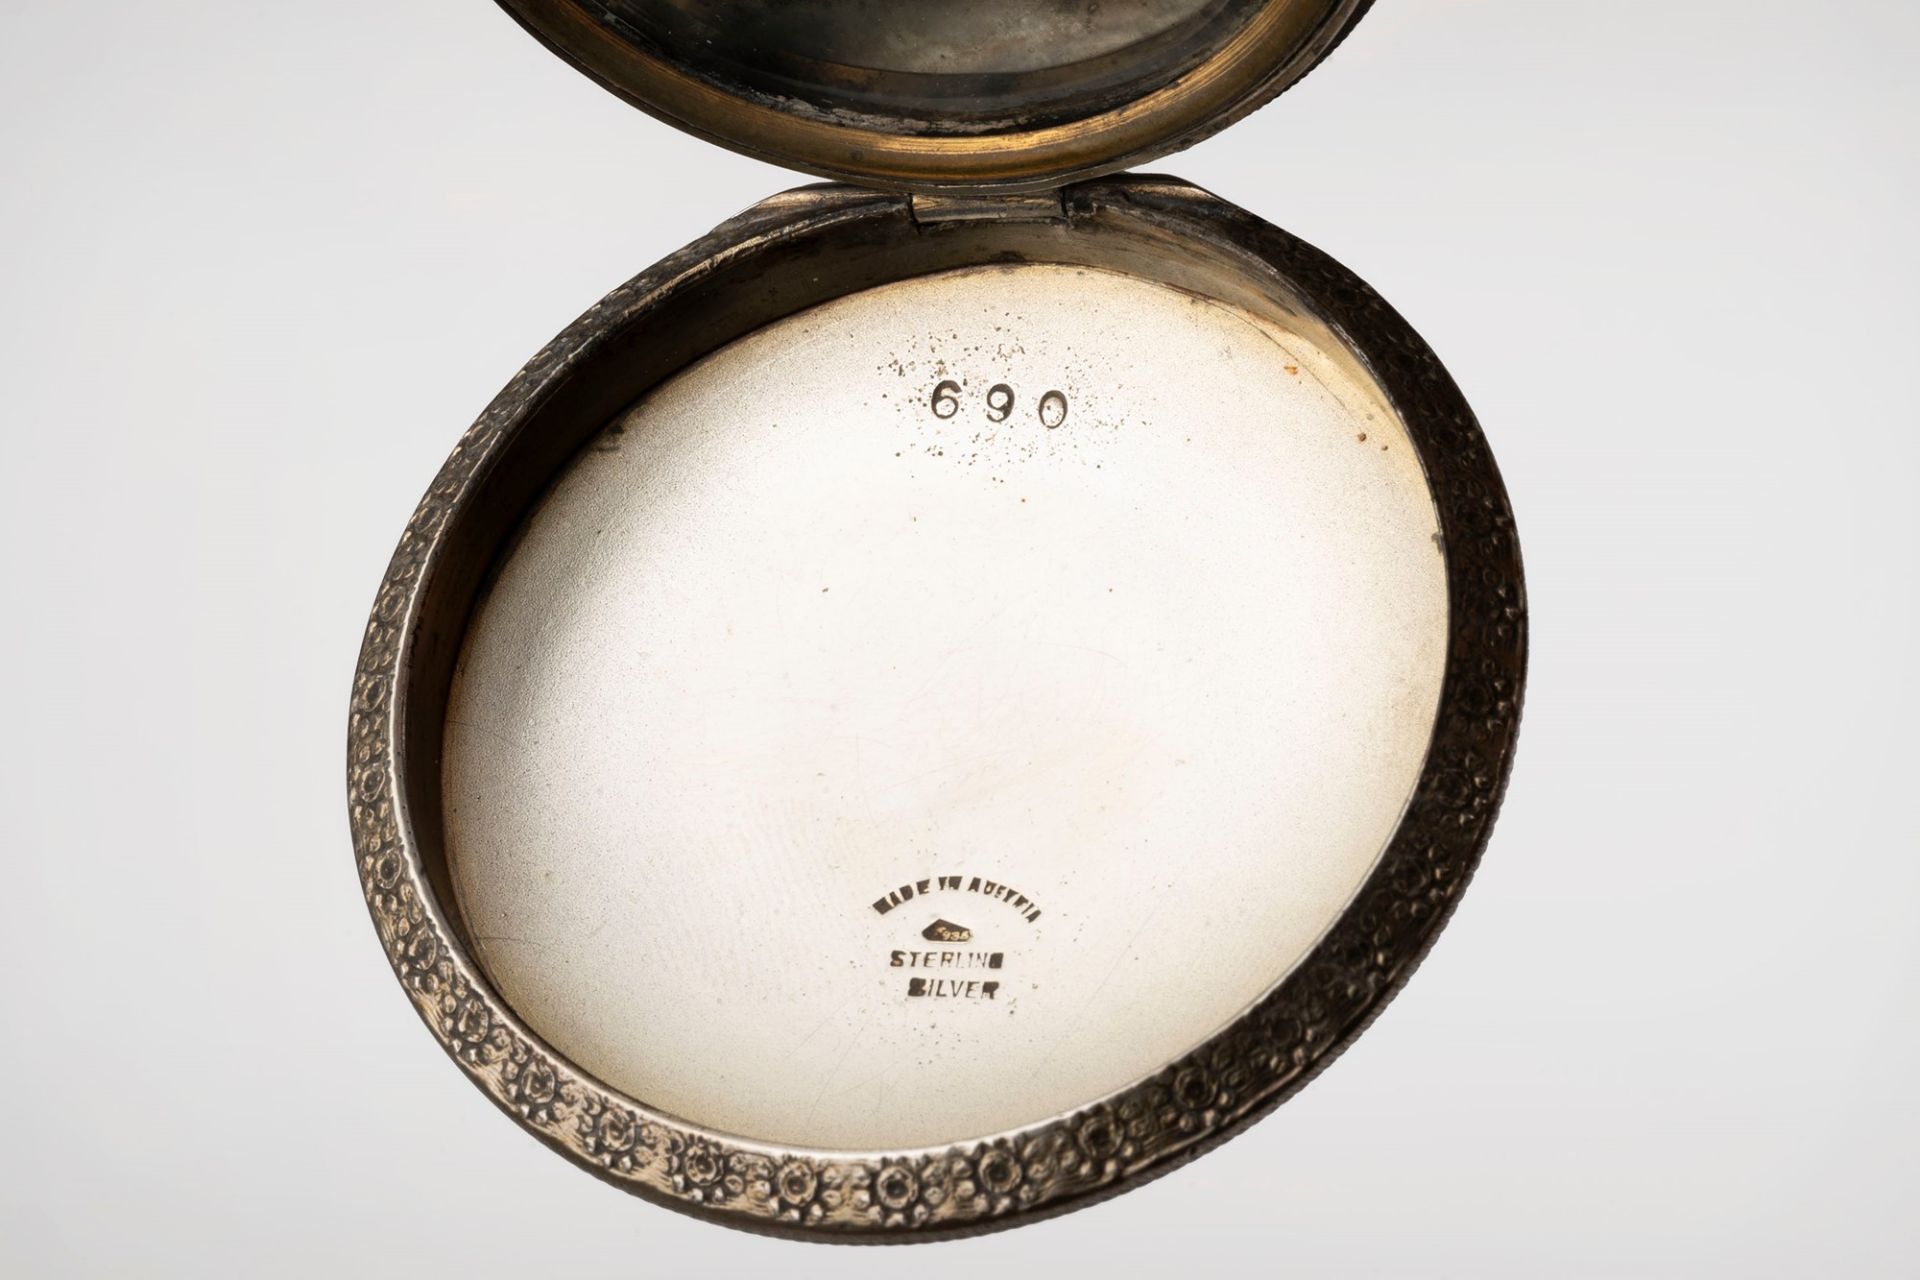 Lot consisting of three boxes and a powder compact, 19th-20th centuries - Image 4 of 6